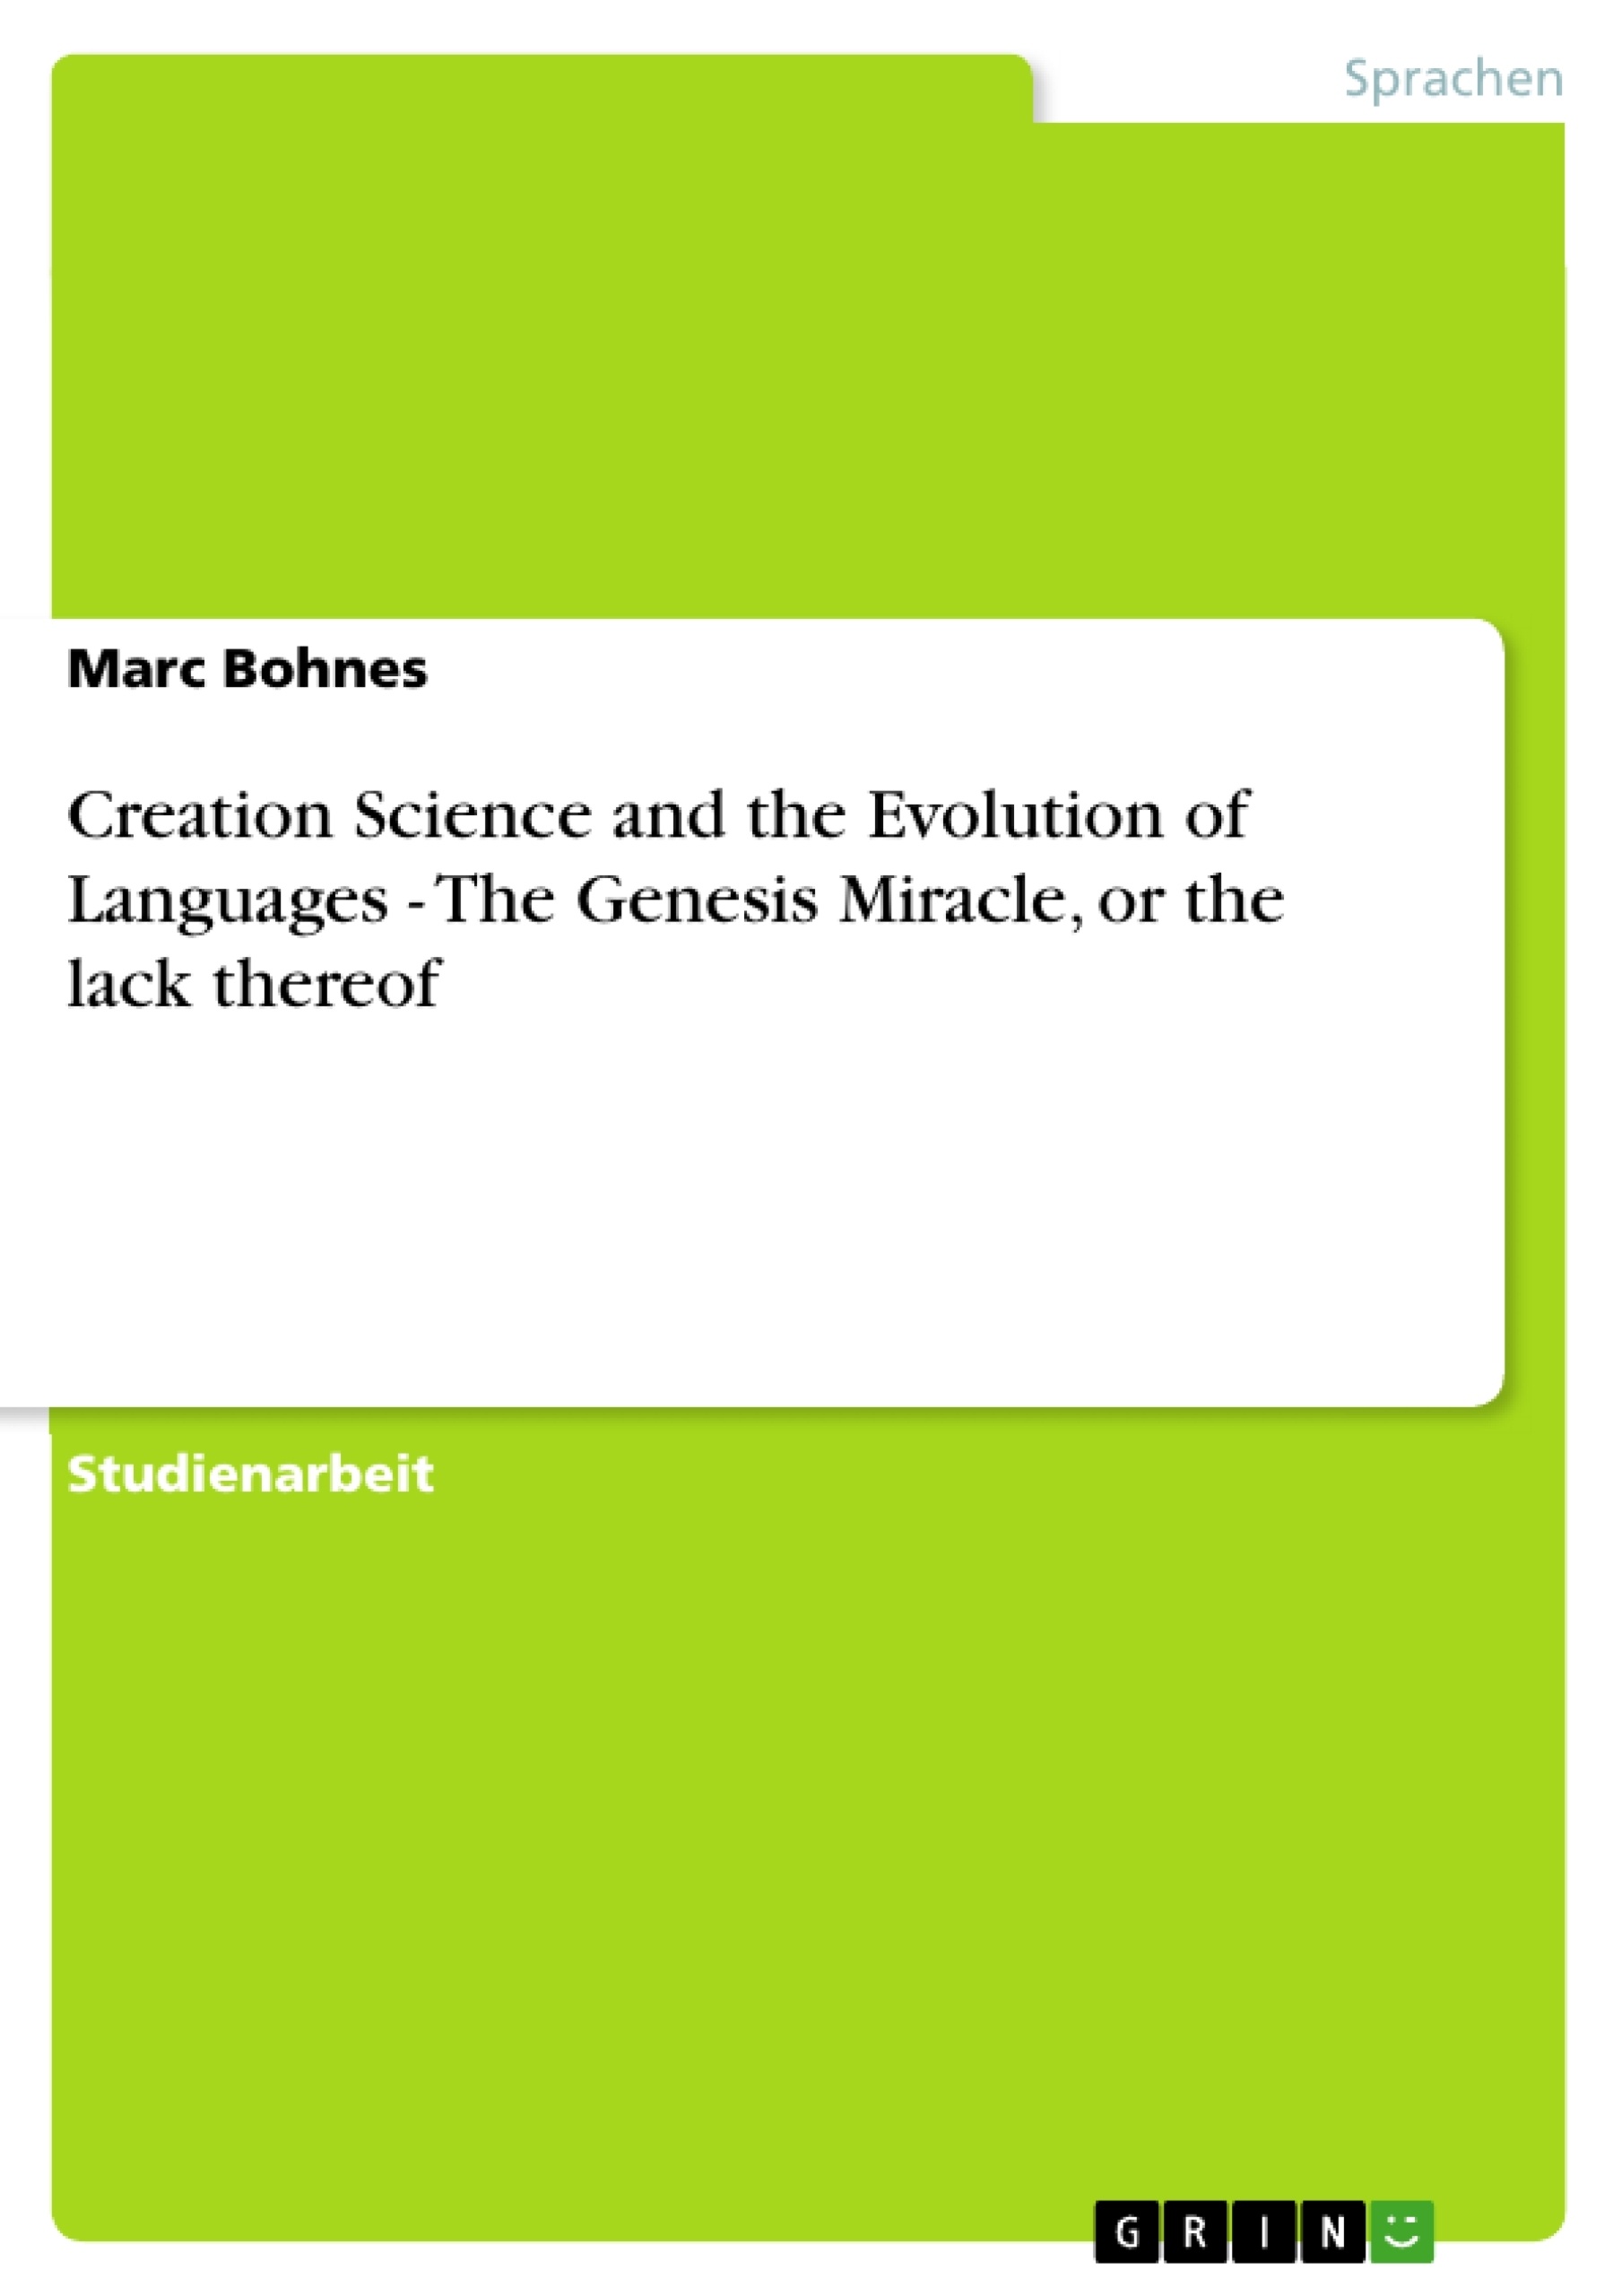 Titel: Creation Science and the Evolution of Languages - The Genesis Miracle, or the lack thereof